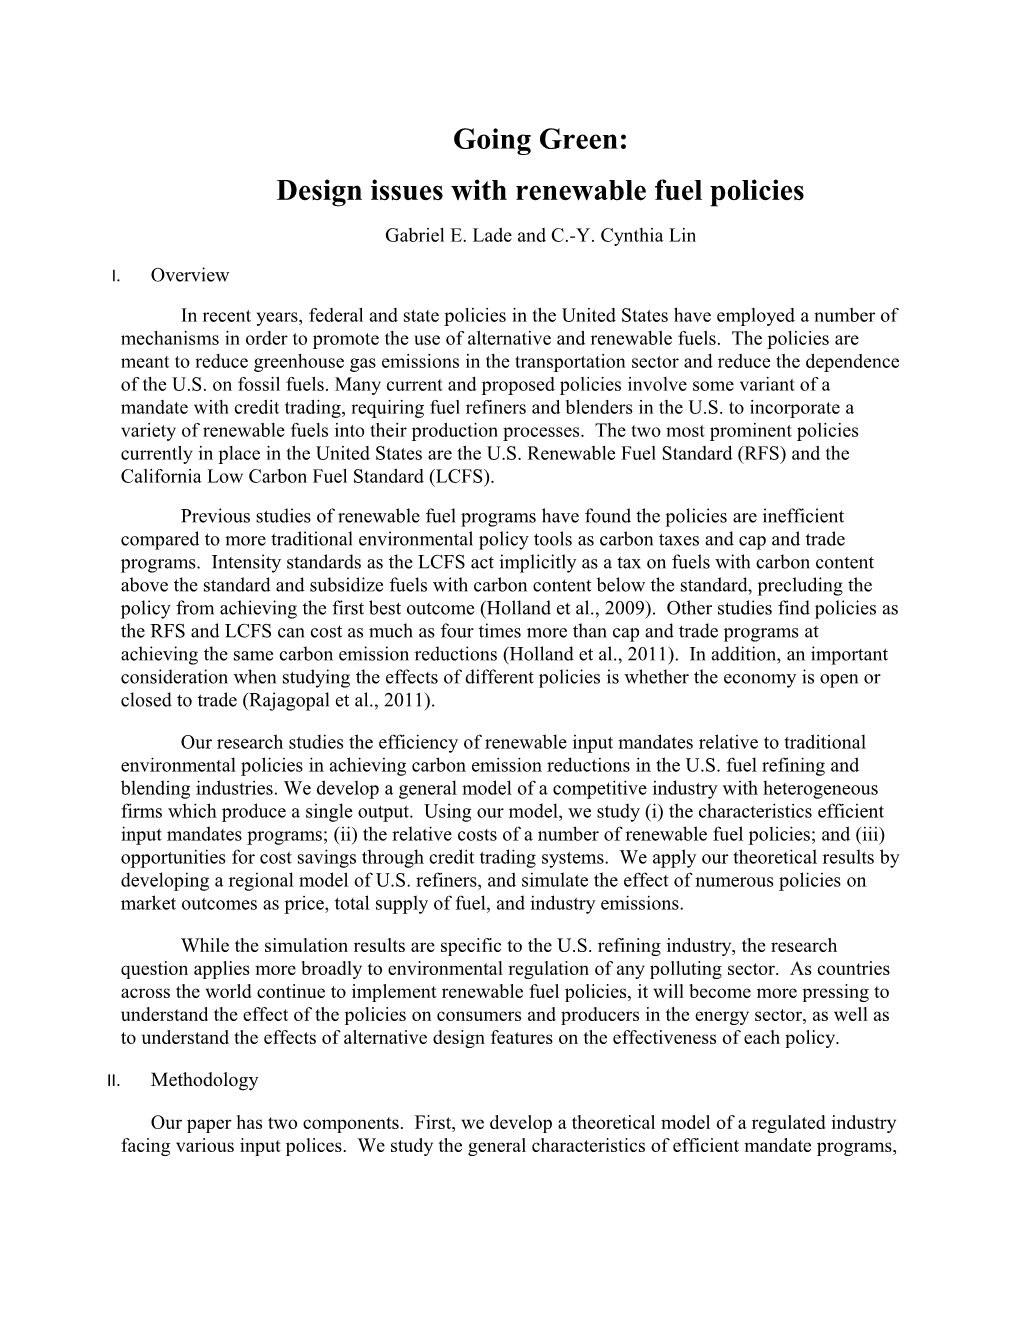 Design Issues with Renewable Fuel Policies